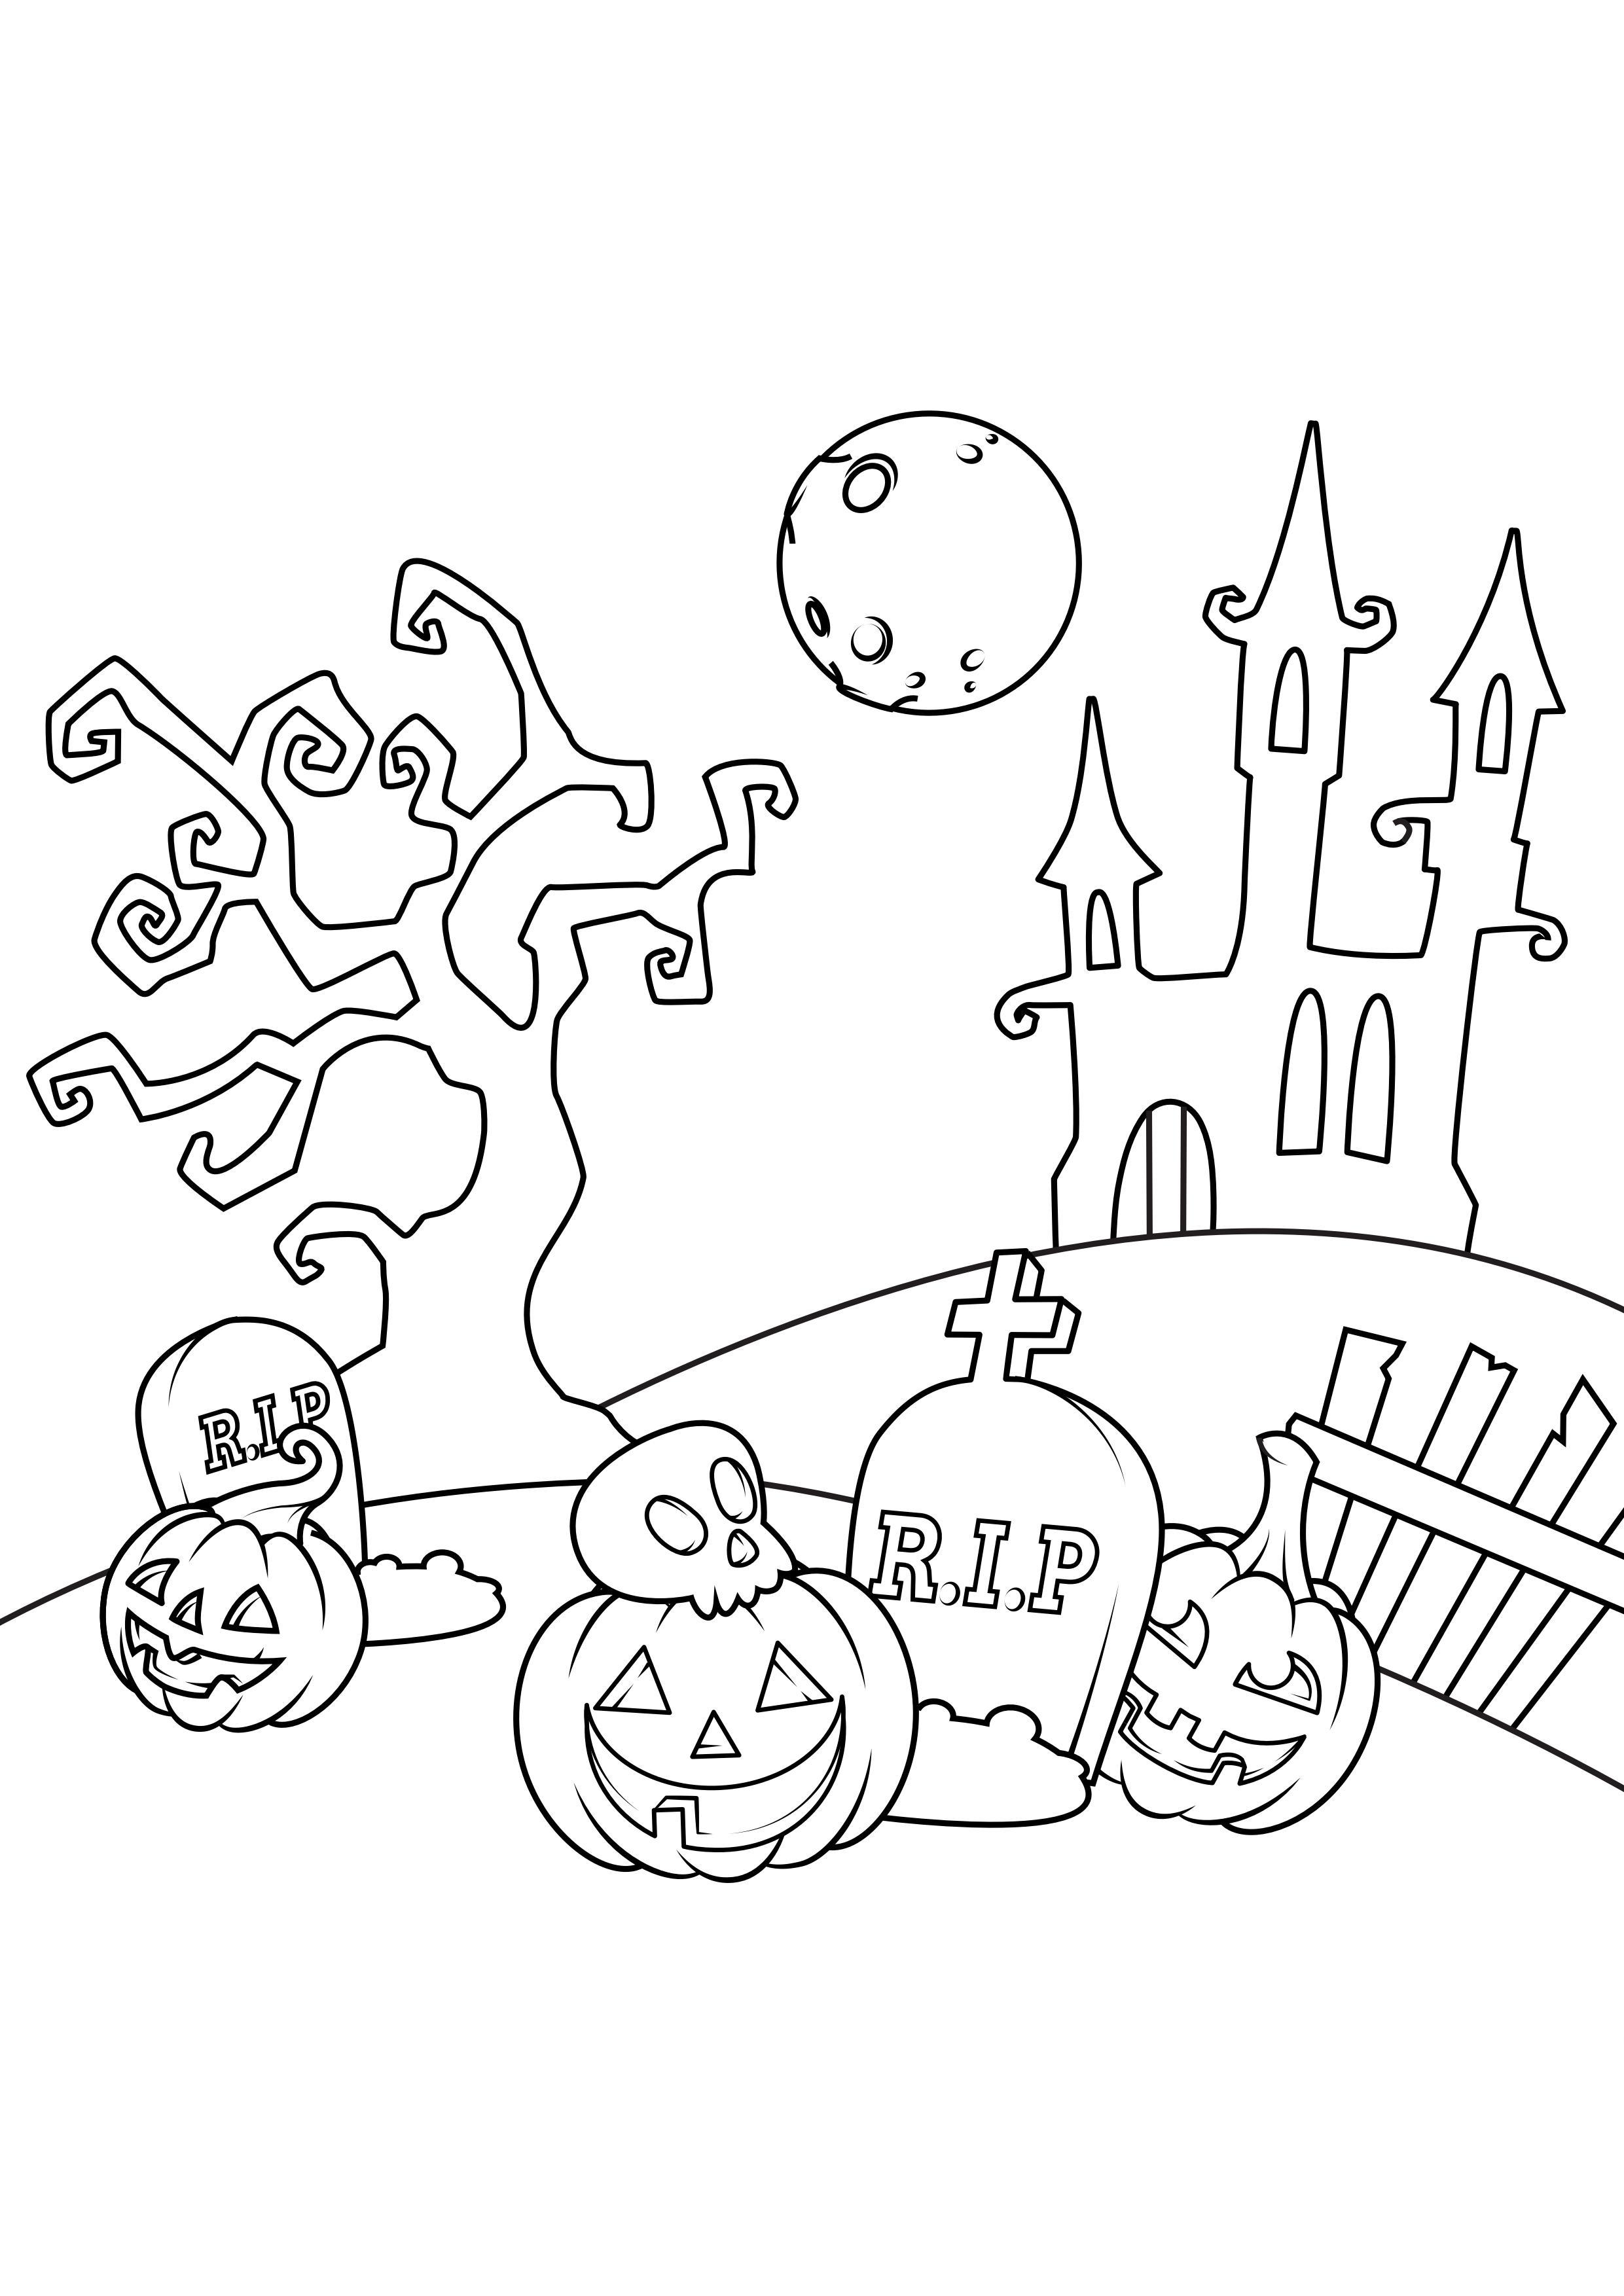 Coloring page halloween scene